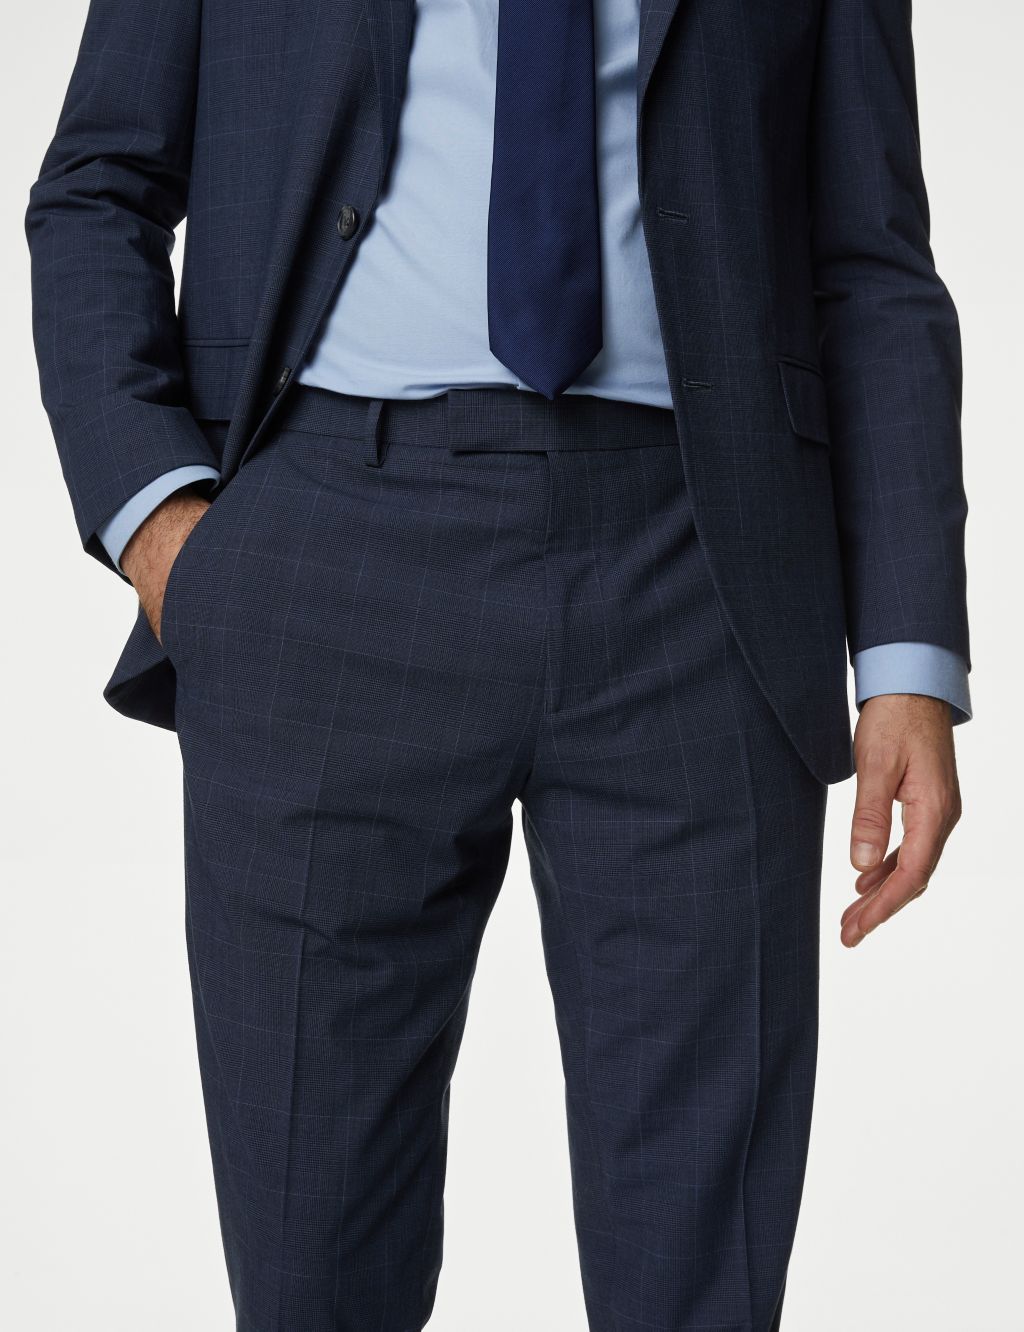 Slim Fit Prince of Wales Check Suit image 7